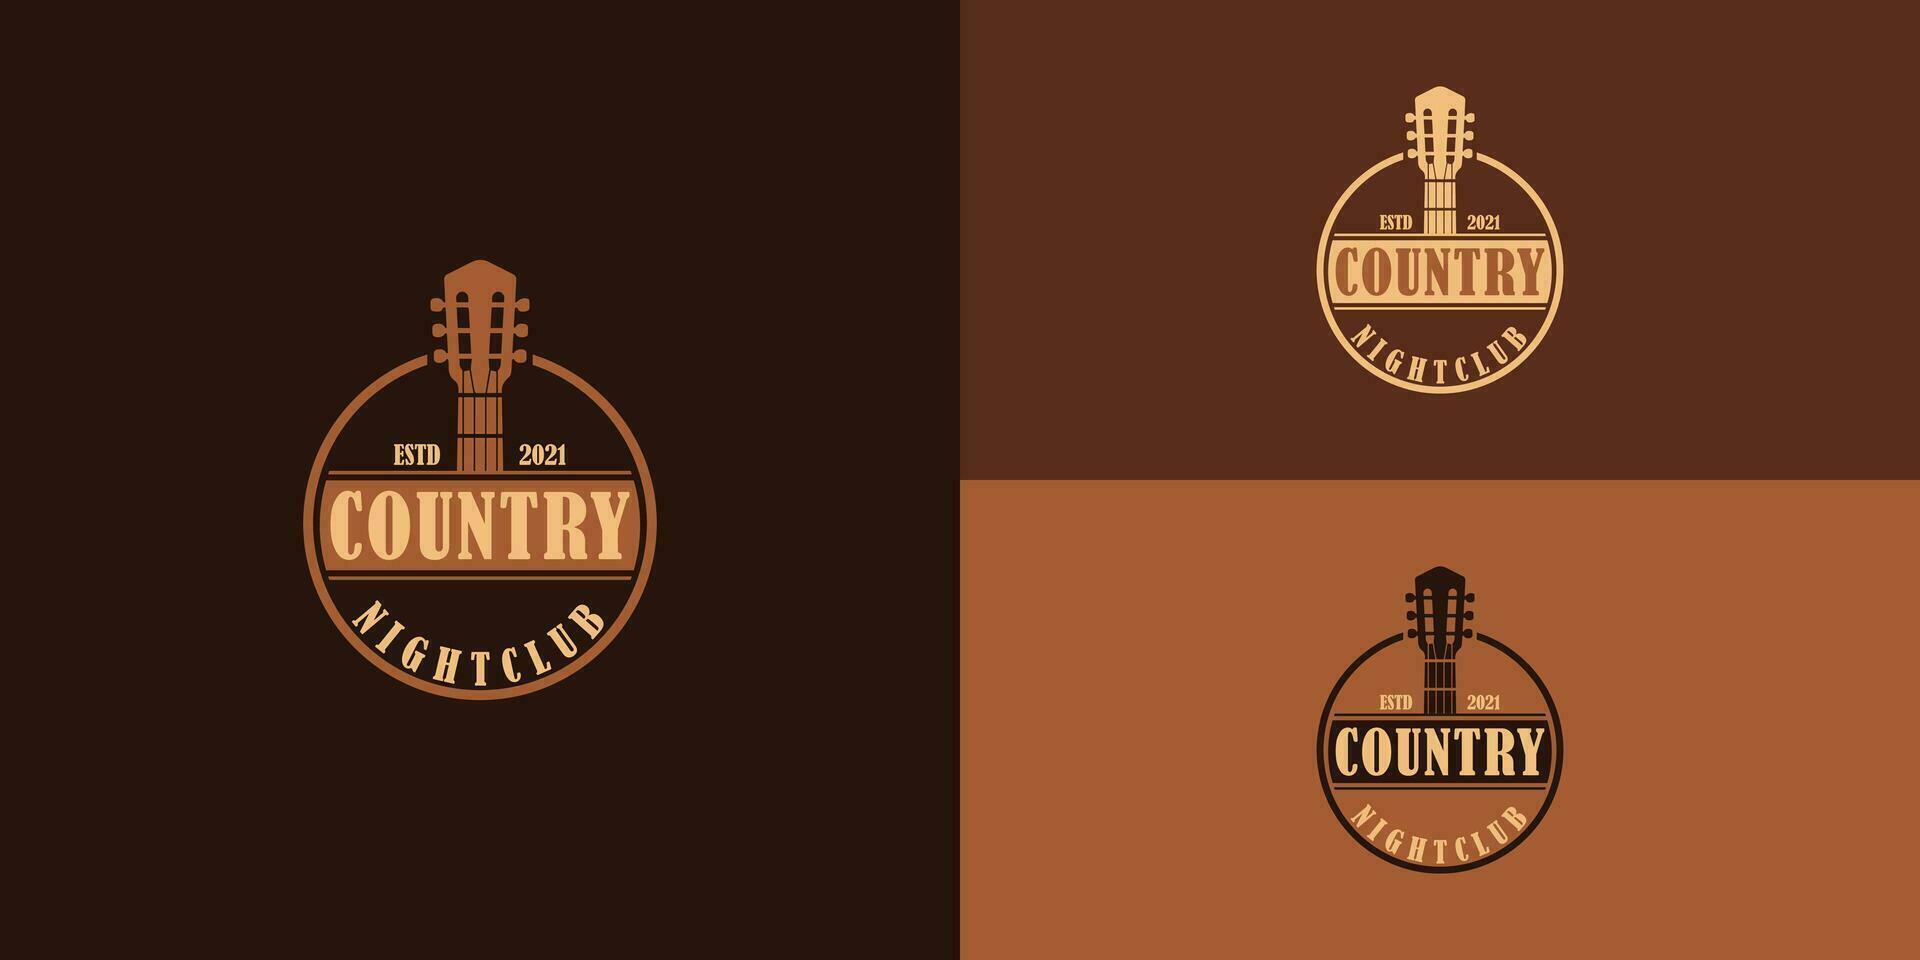 Country Guitar Music Western Vintage Retro Saloon Bar Cowboy logo design presented with multiple background colors. The logo is also suitable for western restaurant and bar logo design inspiration vector